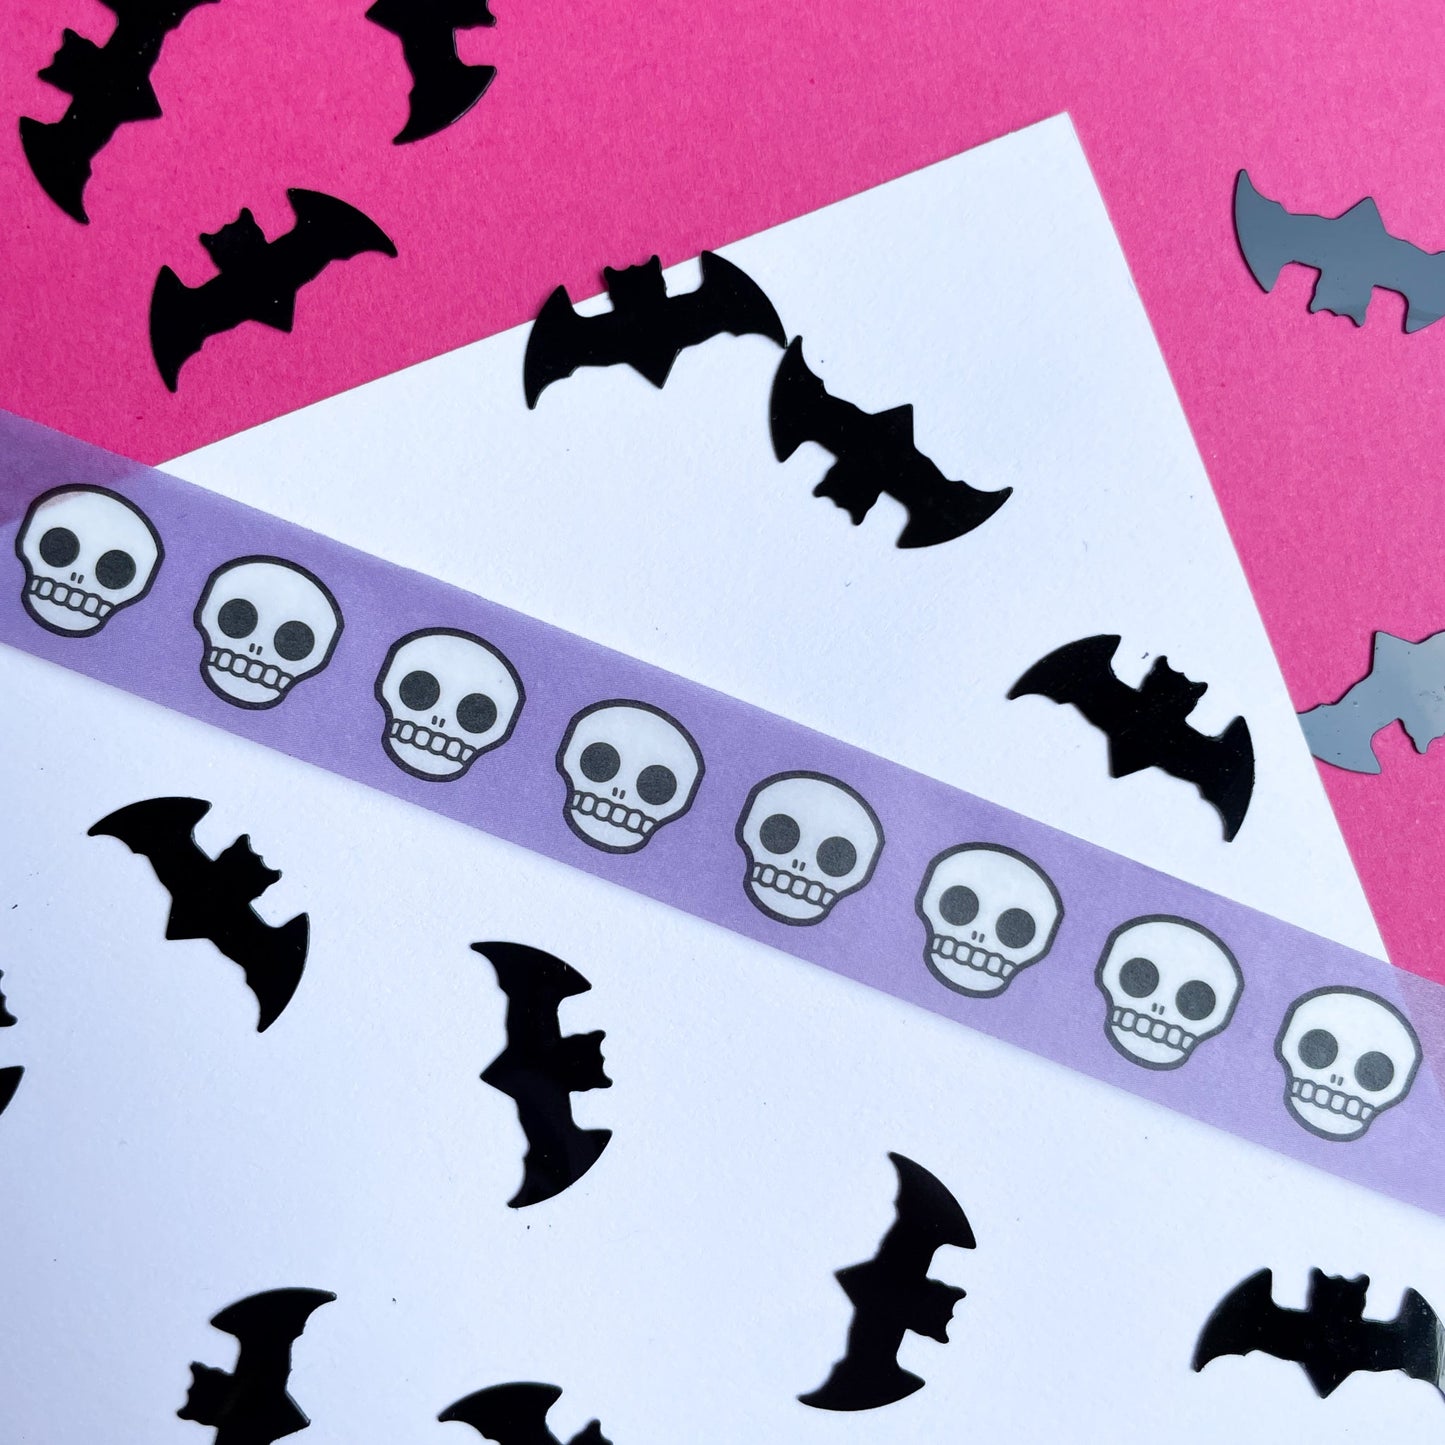 The corner of a piece of paper on a hot pink background. The paper has a piece of periwinkle washi tape with skulls on it stuck to it and bat confetti strewn about. 